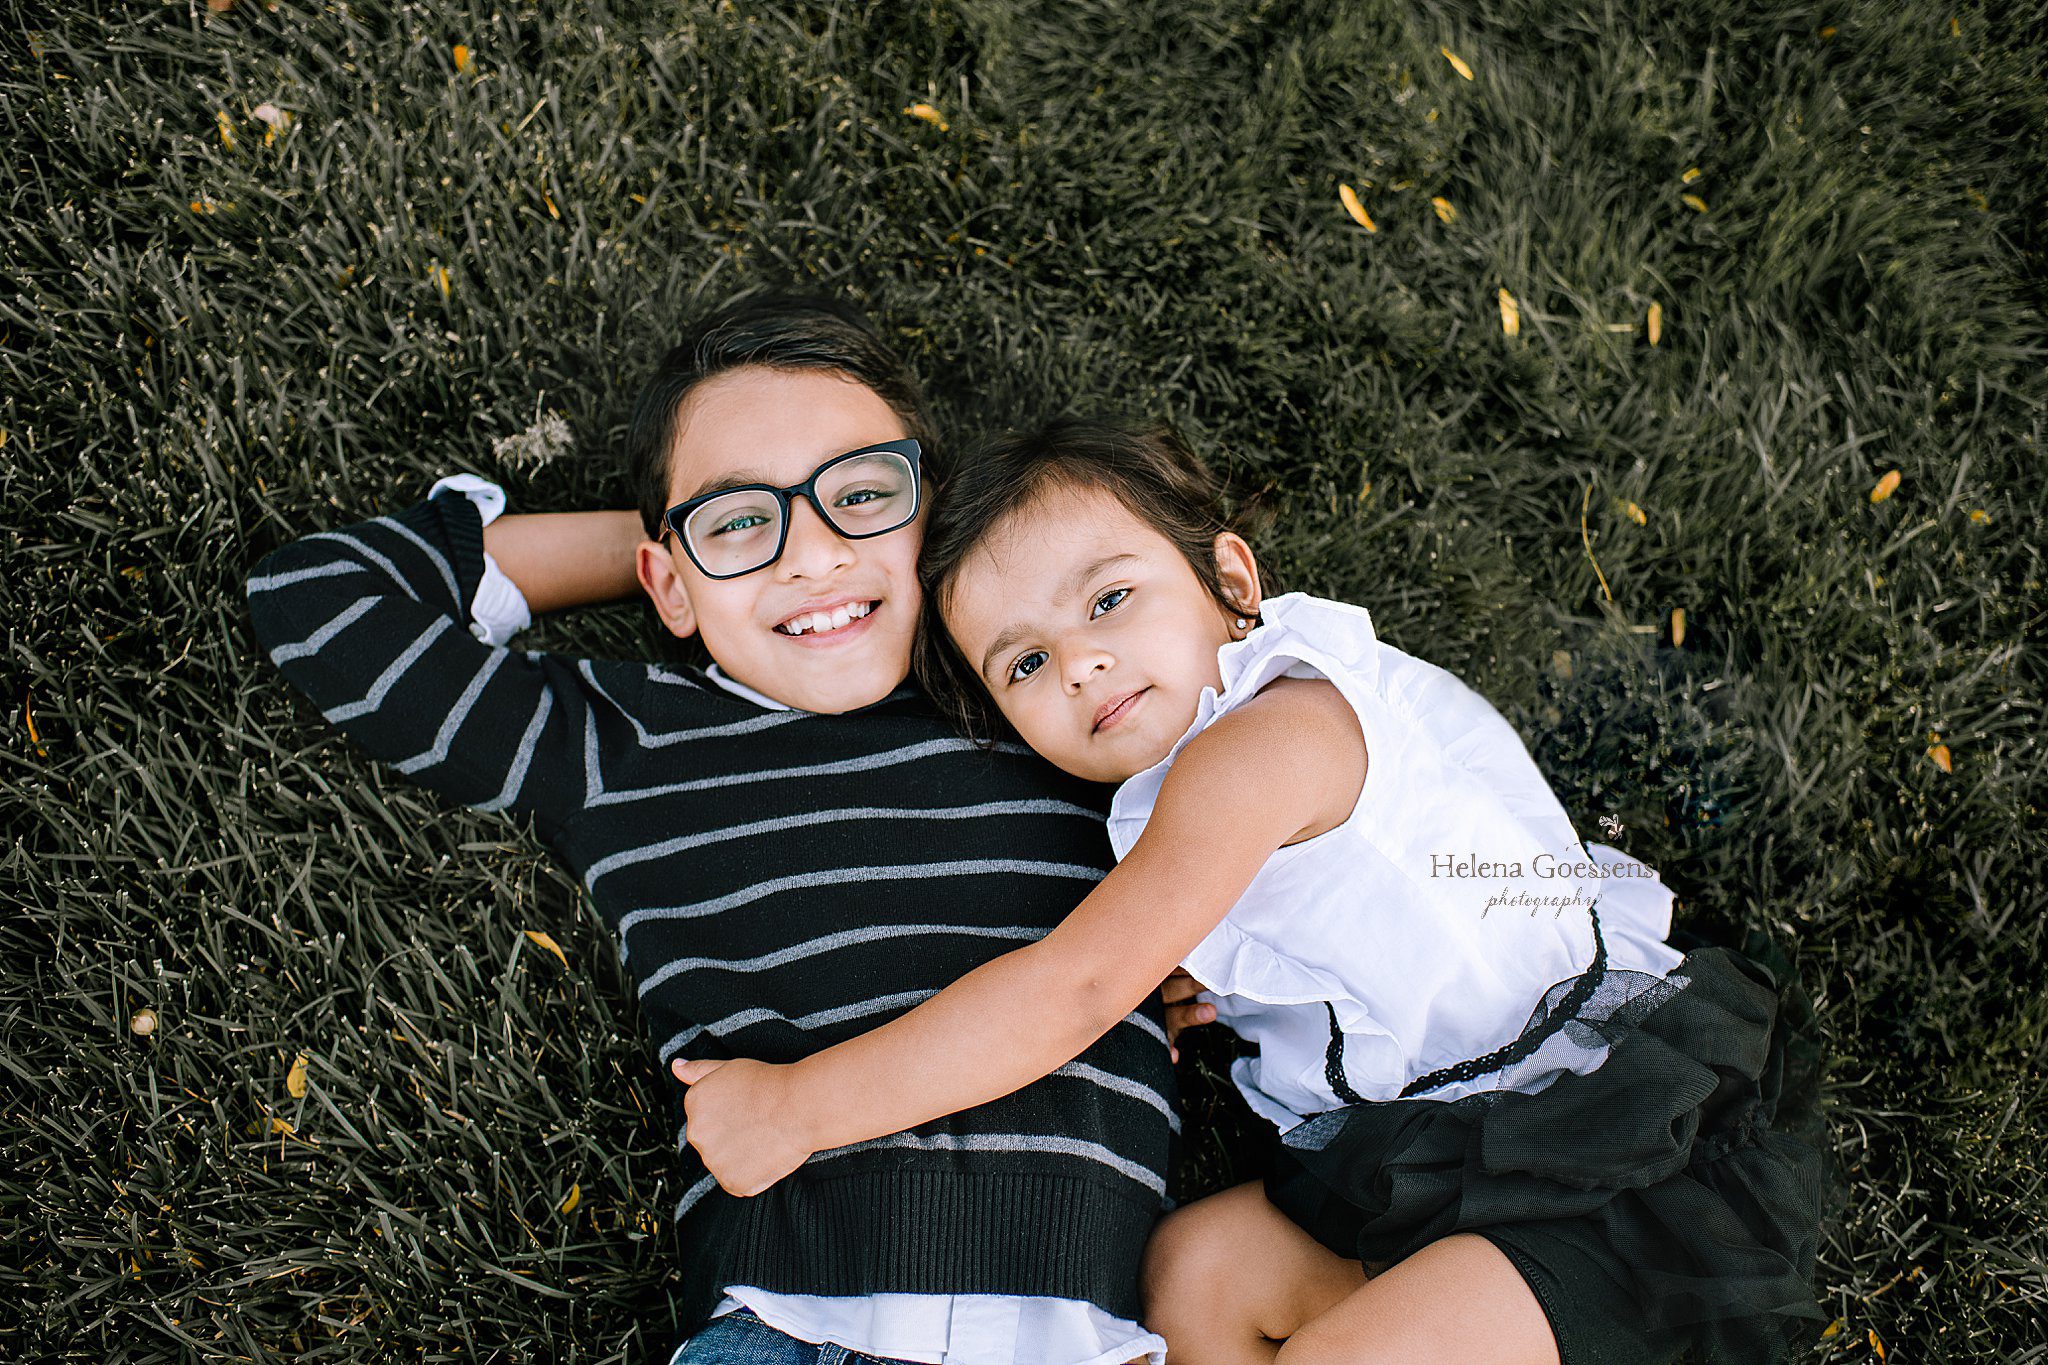 Helena Goessens Photography photographs siblings laying in grass